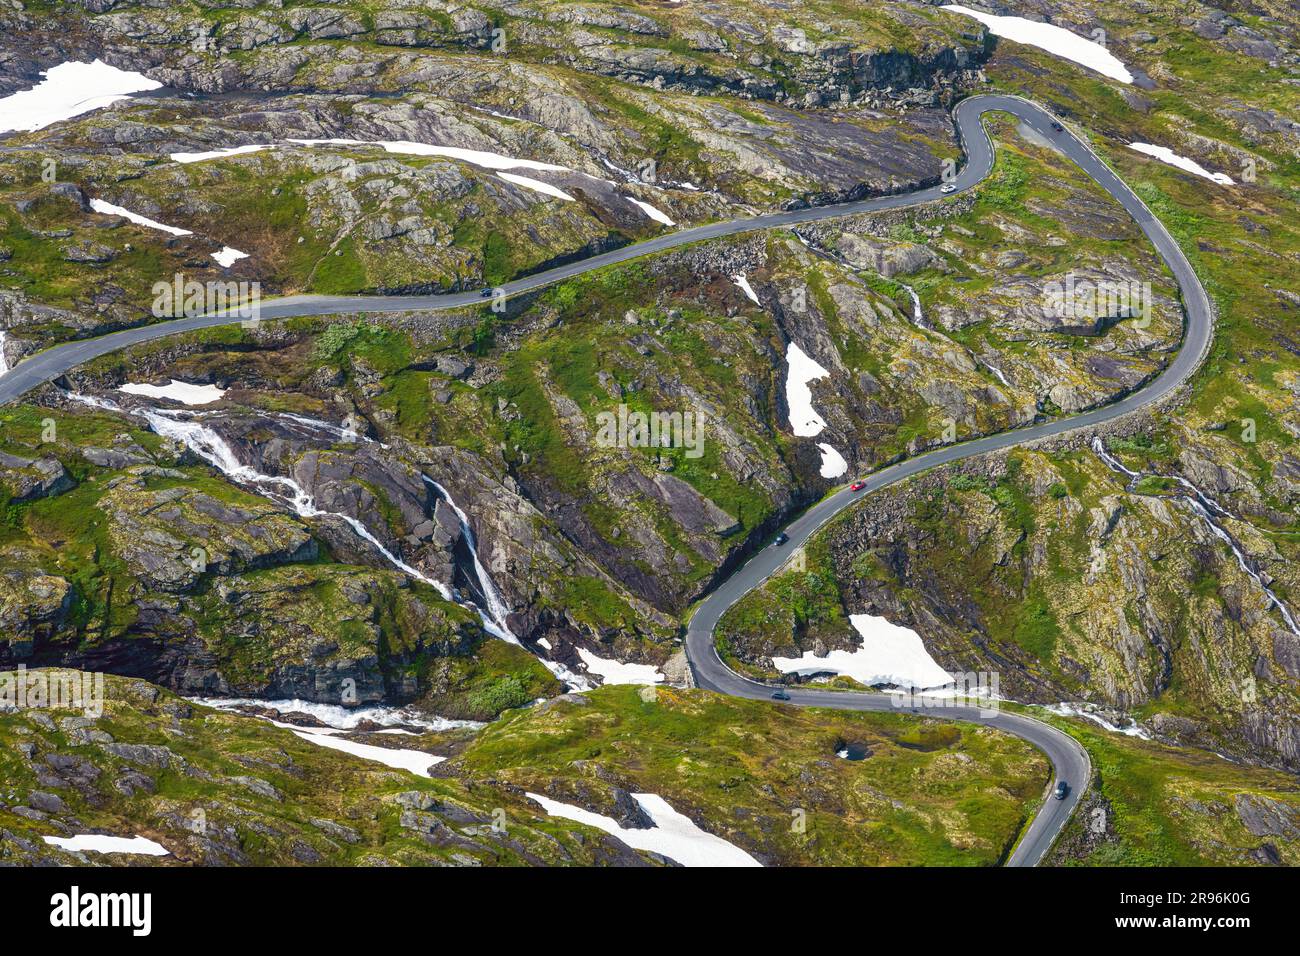 Winding road in a green landscape with patches of snow, seen in Norway Stock Photo